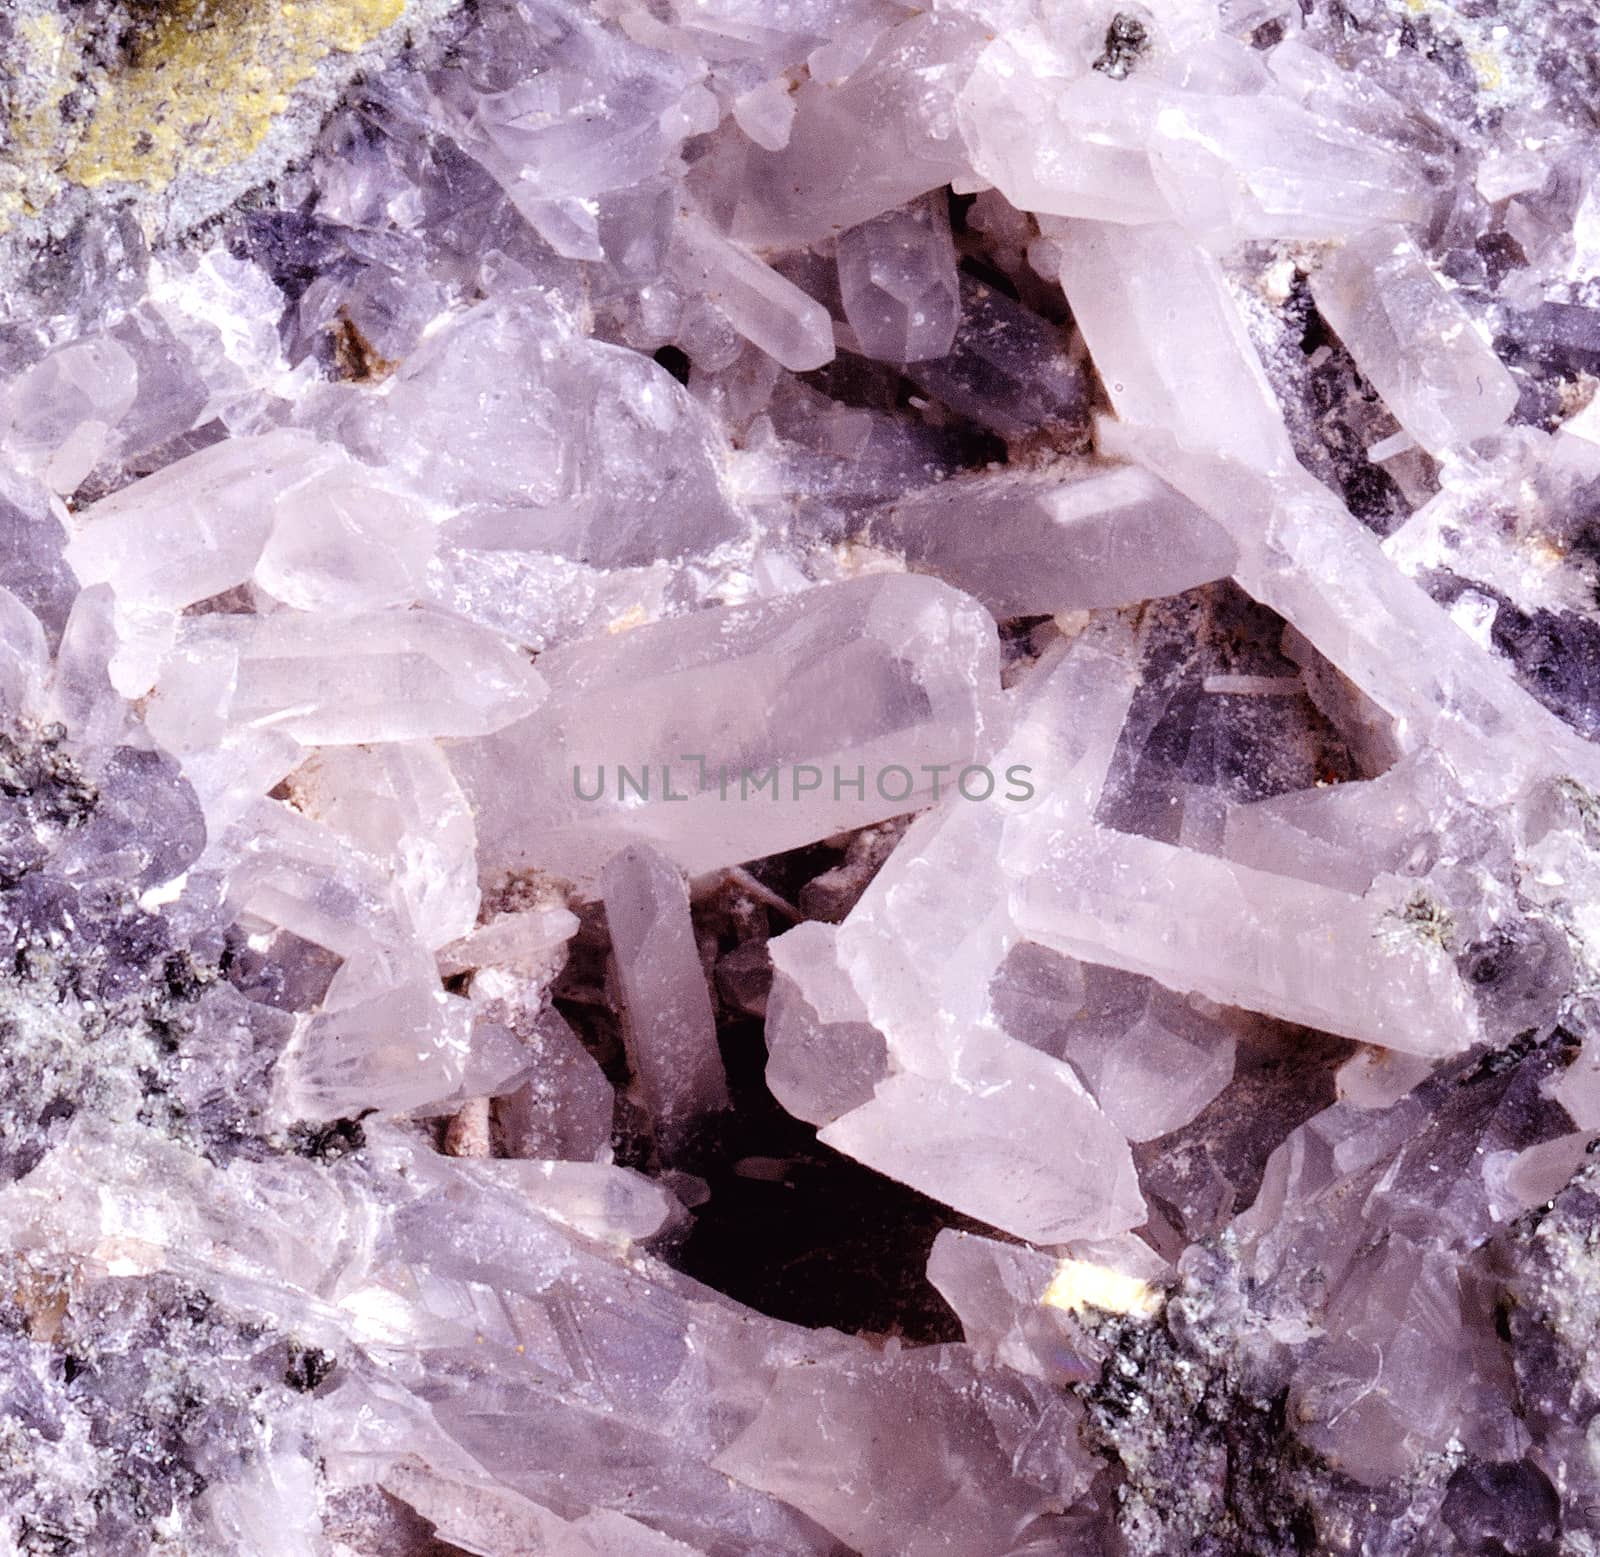 SAMPLES OF CRYSTALS PHOTOGRAPHED IN MACRO.